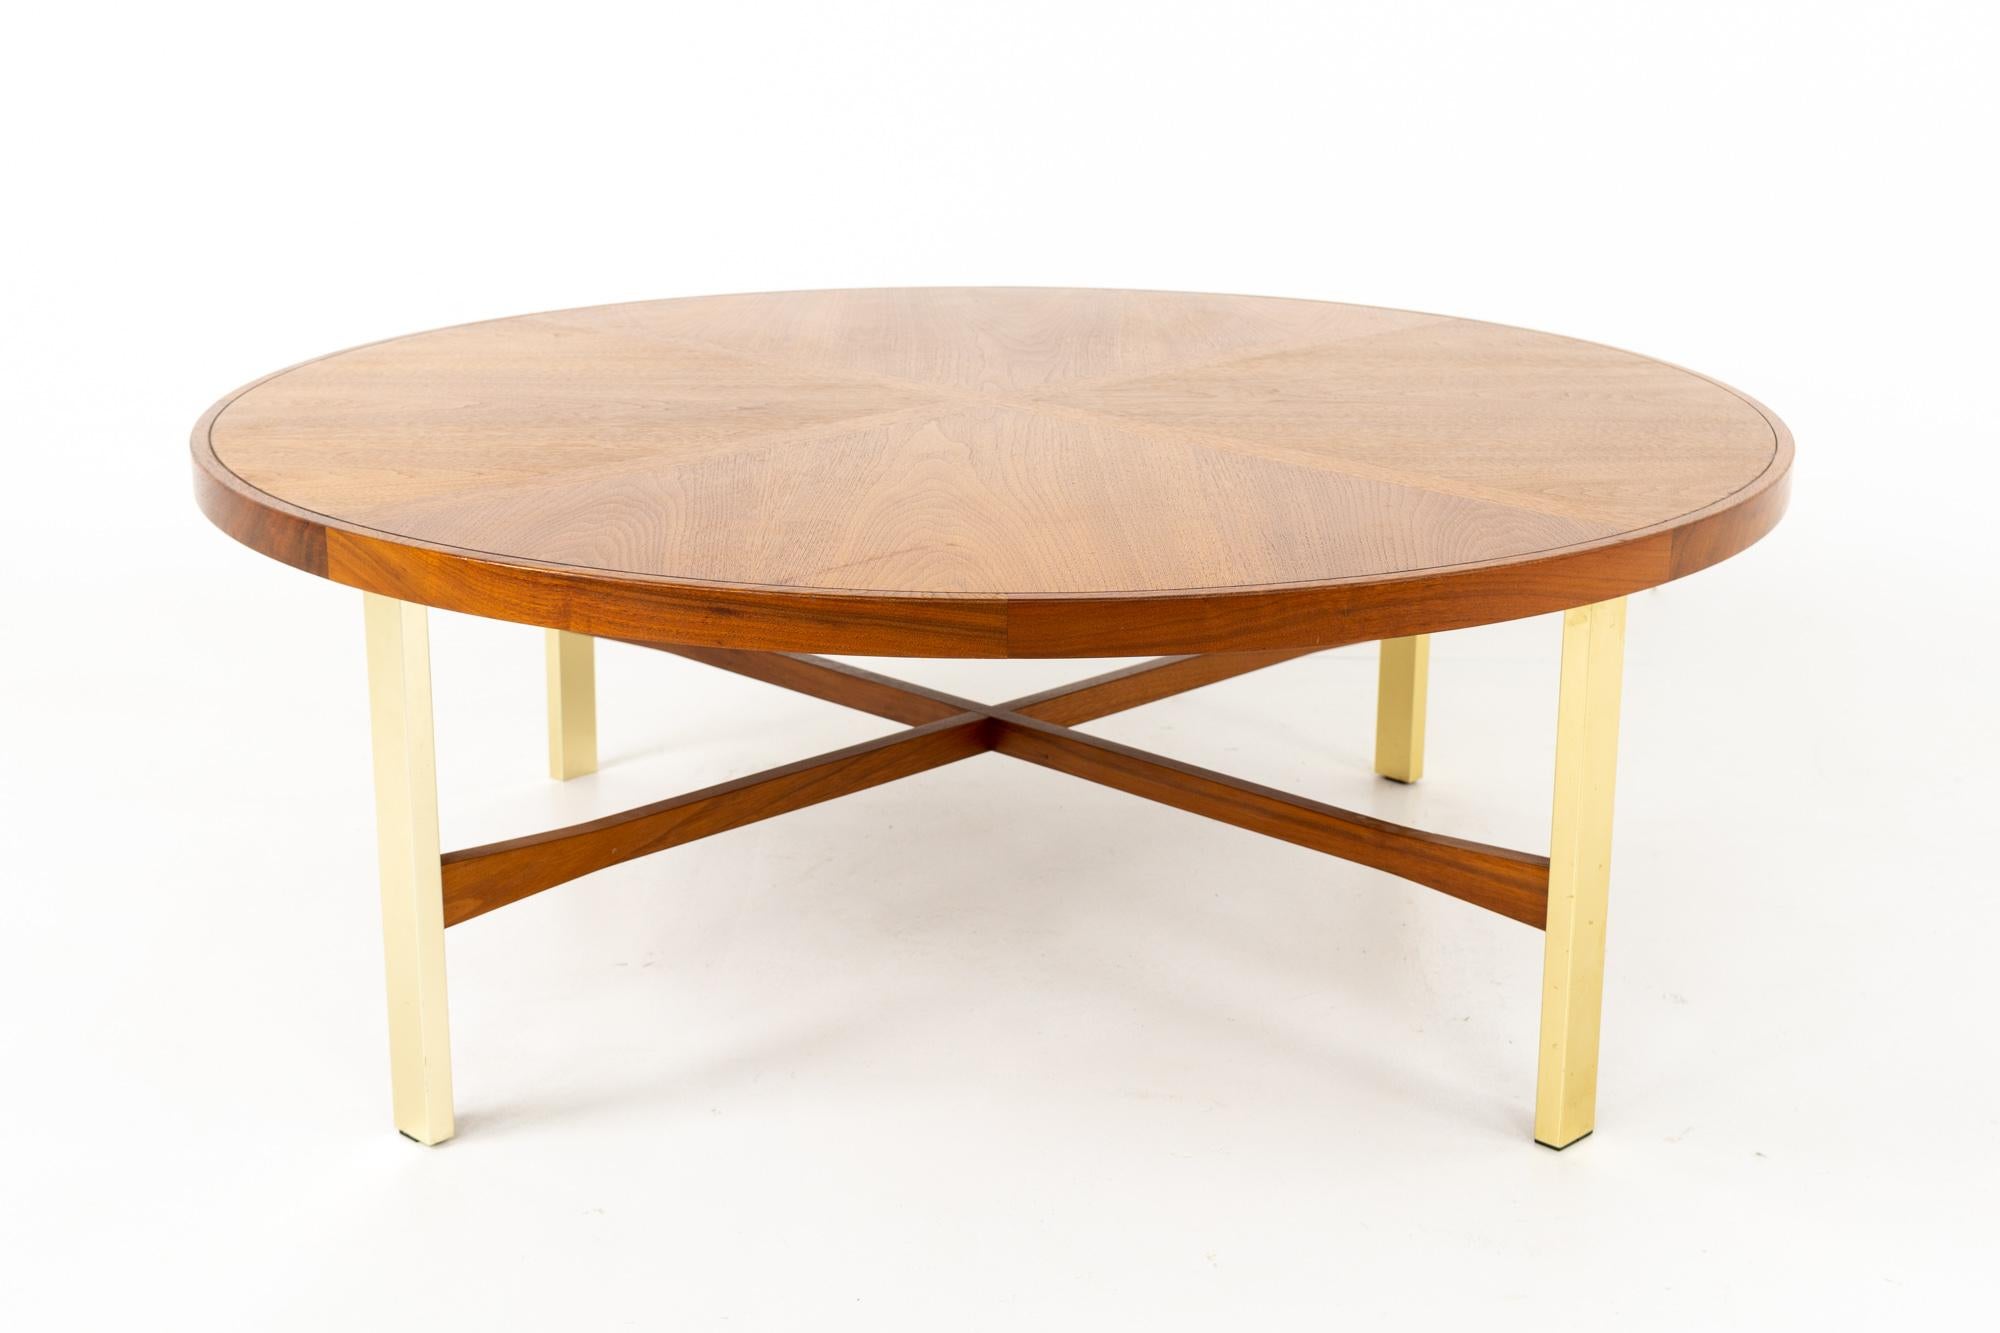 Drexel Heritage Mid Century walnut and brass round coffee table
This table is 42 wide and 42 deep by 15.25 inches high

This piece is available in what we call restored vintage condition. Upon purchase it is fixed so it’s free of watermarks, chips